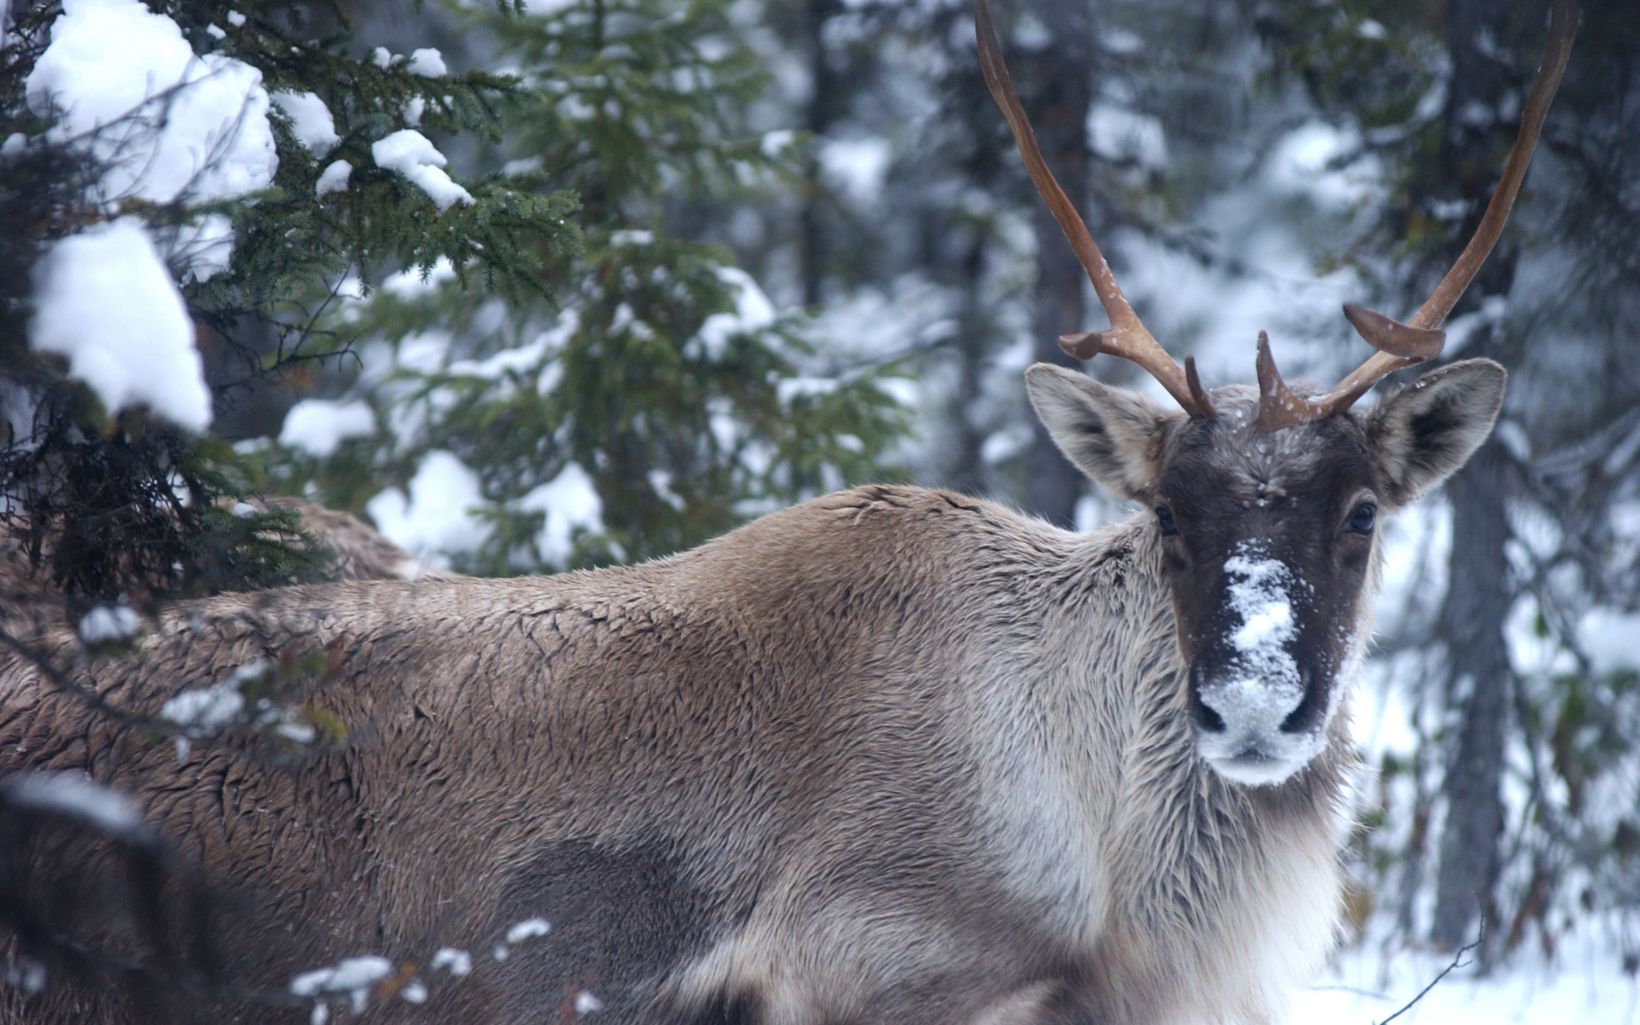 During the winter, woodland caribou sniff out and eat lichen growing underneath snow on the forest floor.